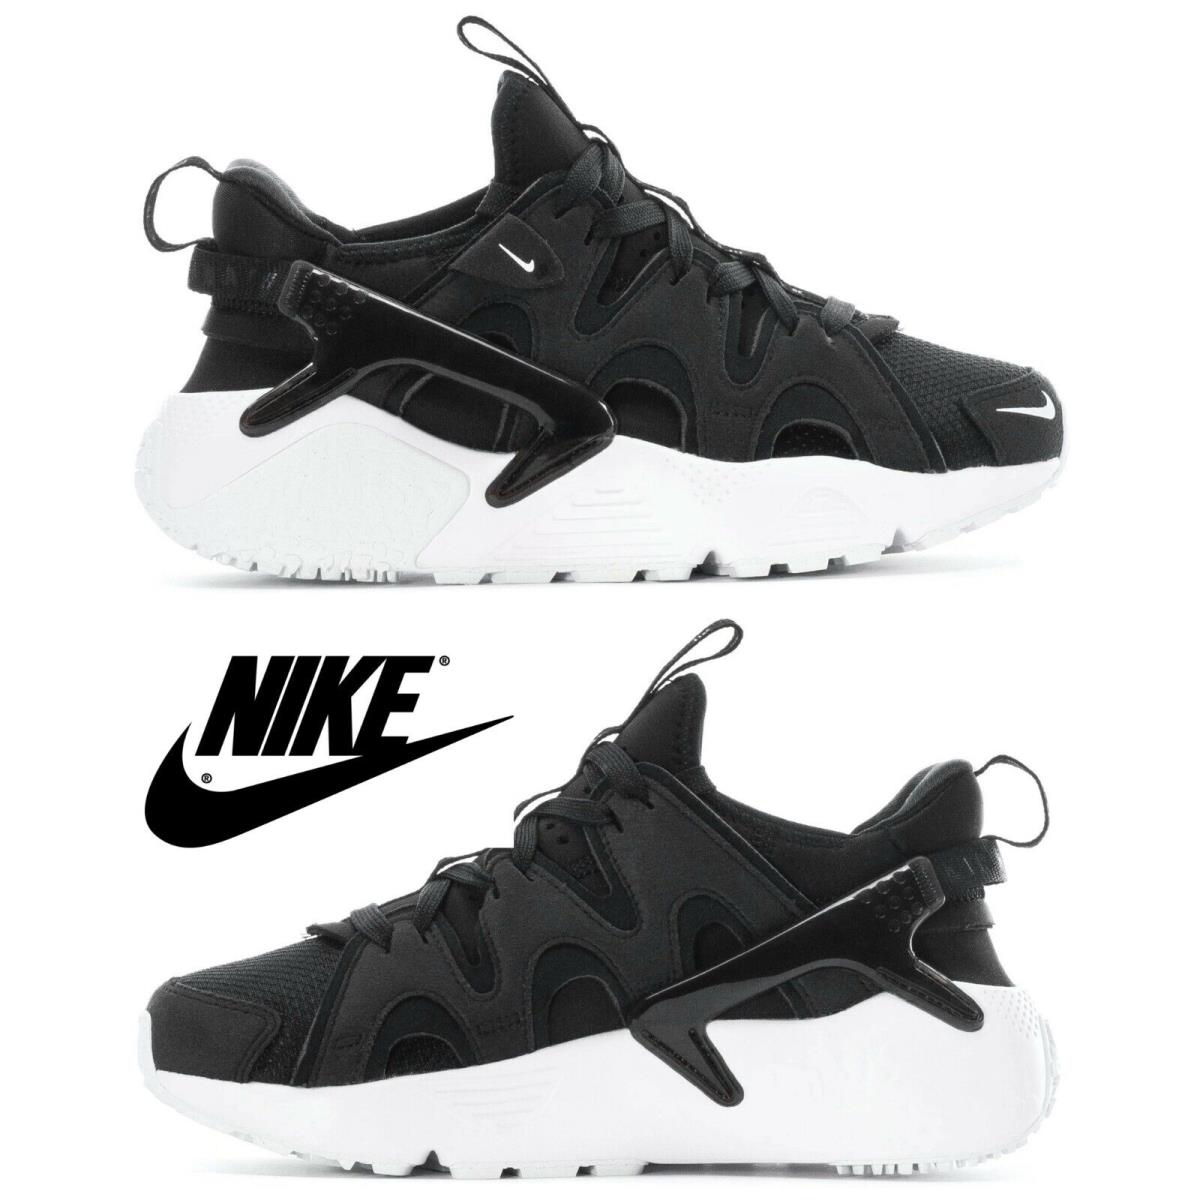 Nike Air Huarache Craft Womens Casual Shoes Running Athletic Comfort Black White